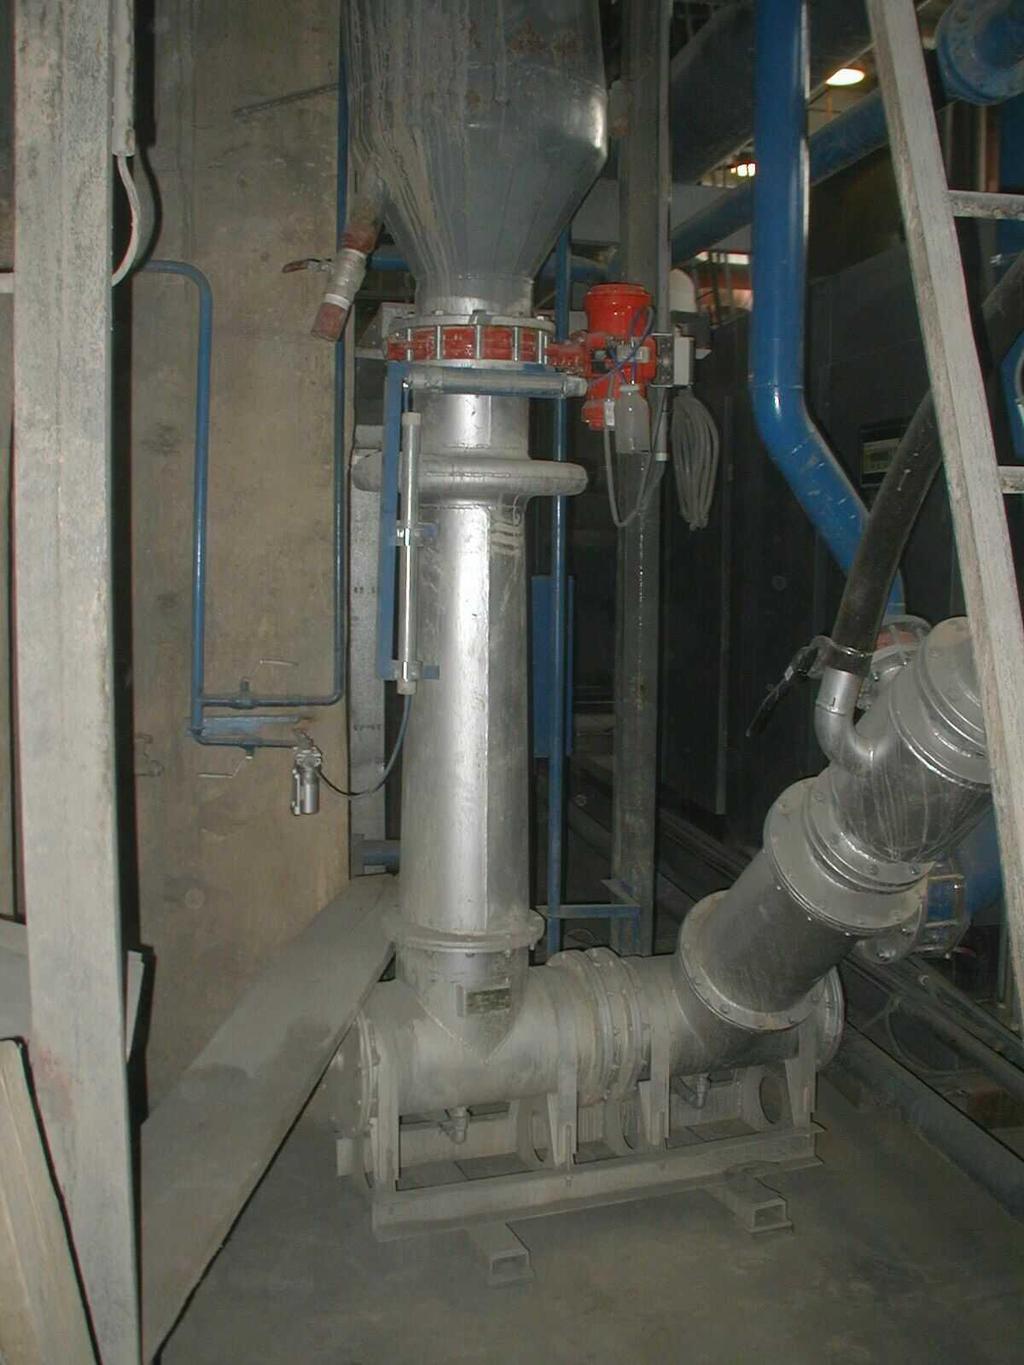 The fly ash output from hopers rotary feeders direct into conveying pipelines of low-pressure system and was conveyed through an immediate bin into a storage silo by a chamber feeder.